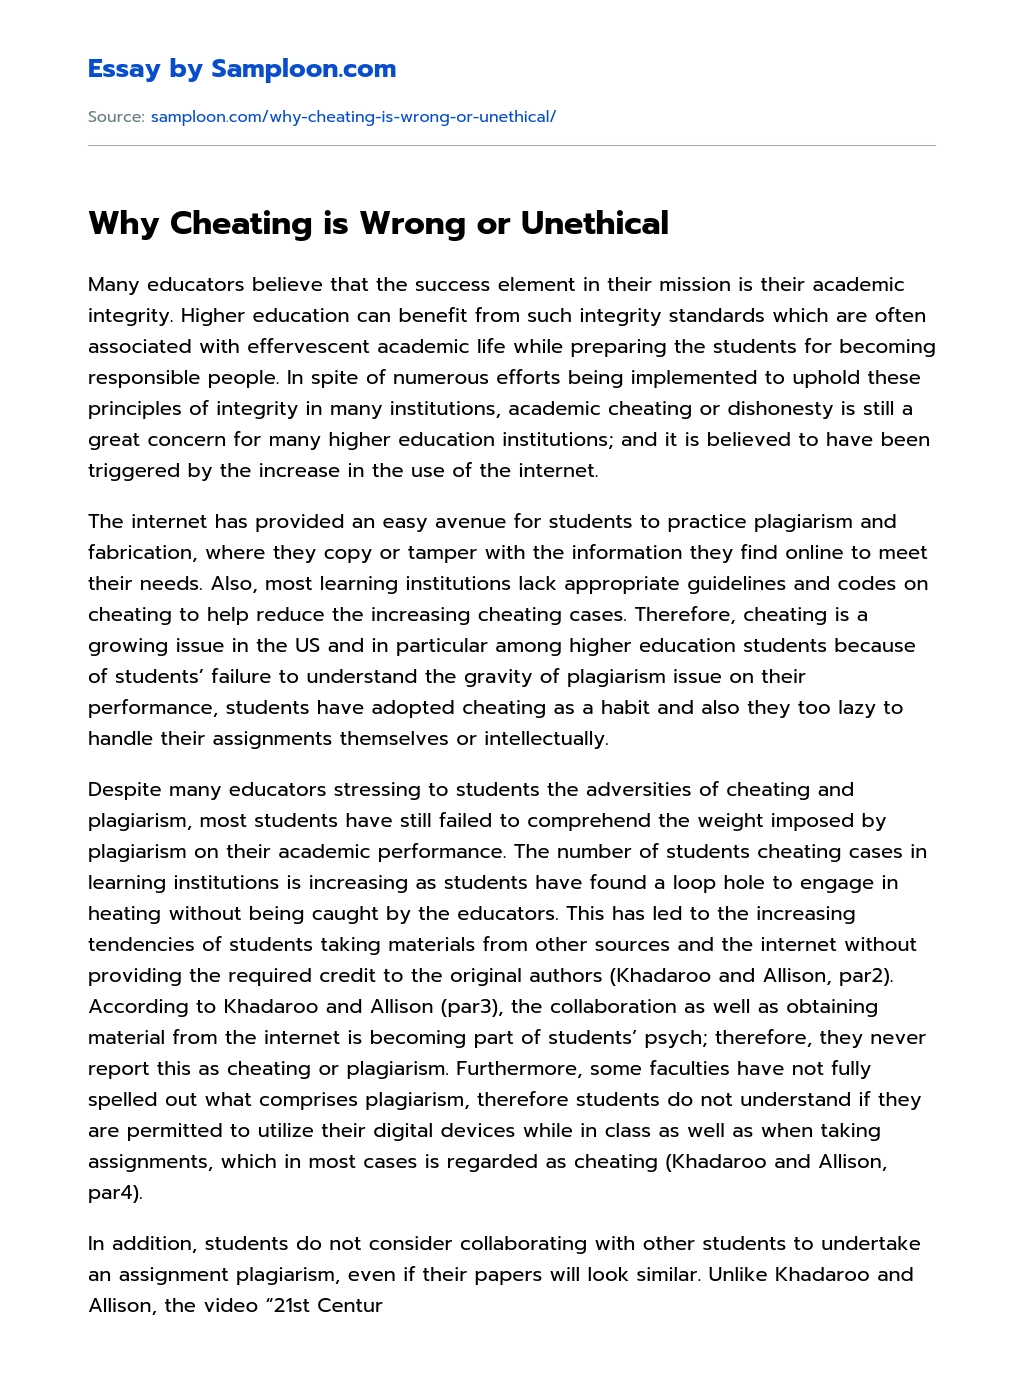 Why Cheating is Wrong or Unethical essay